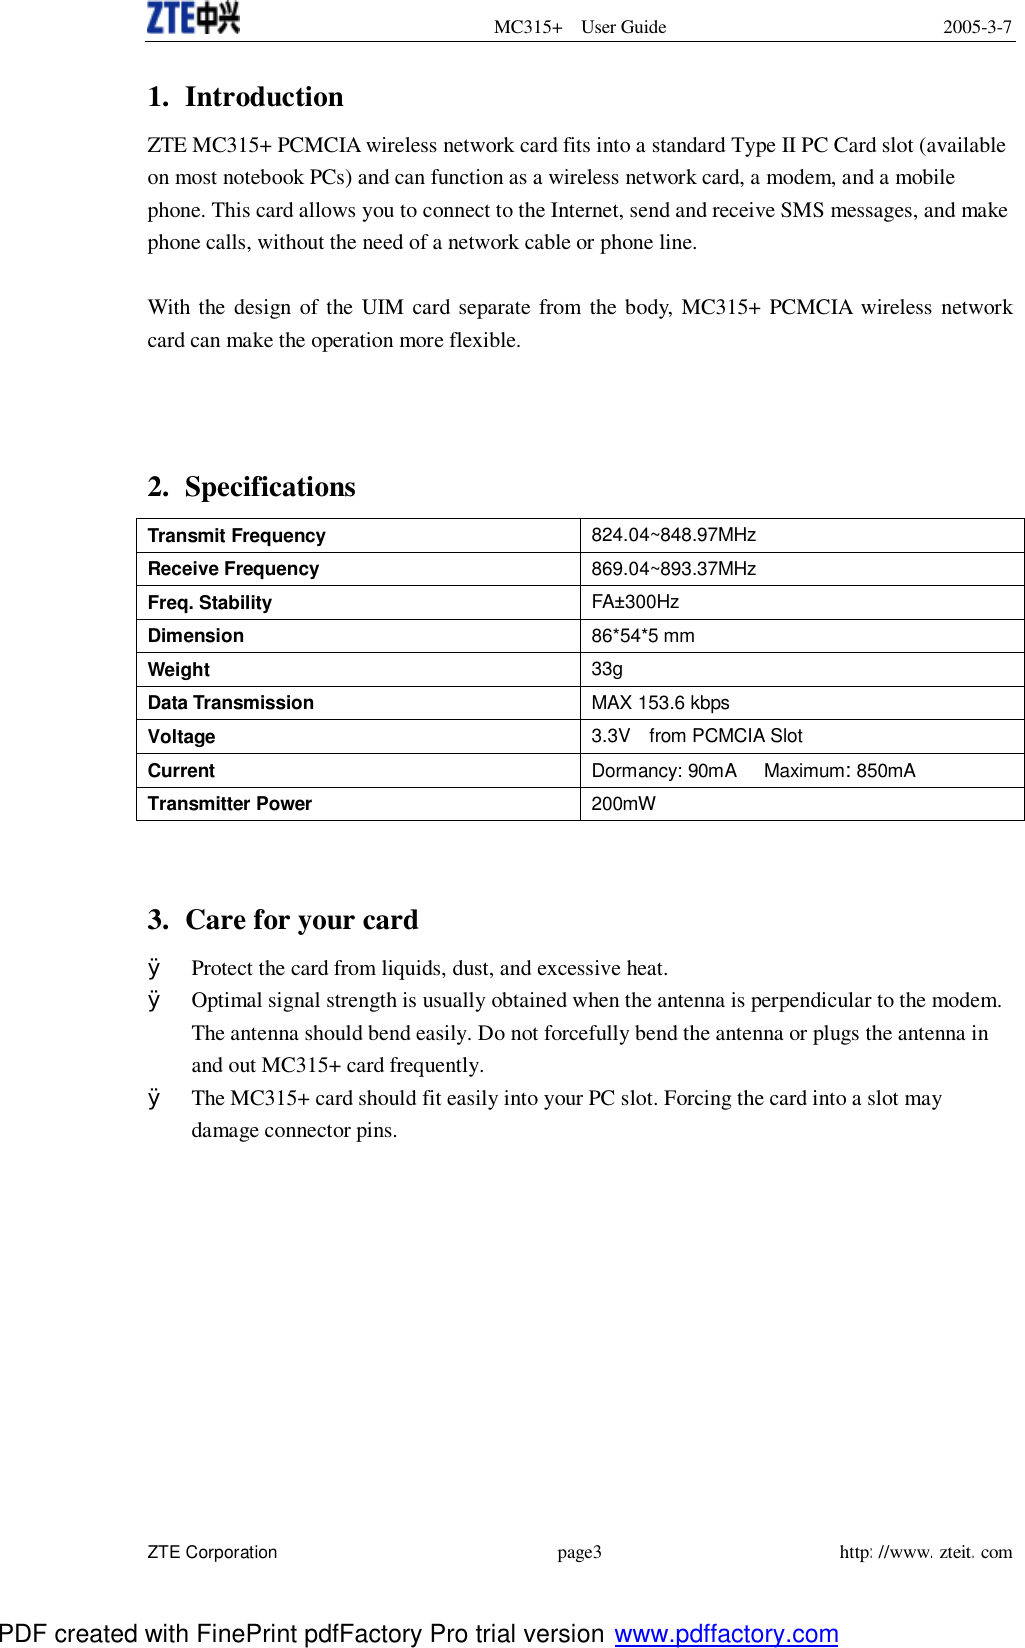  MC315+ User Guide 2005-3-7  ZTE Corporation page3 http://www.zteit.com 1. Introduction ZTE MC315+ PCMCIA wireless network card fits into a standard Type II PC Card slot (available on most notebook PCs) and can function as a wireless network card, a modem, and a mobile phone. This card allows you to connect to the Internet, send and receive SMS messages, and make phone calls, without the need of a network cable or phone line.  With the design of the UIM card separate from the body, MC315+ PCMCIA wireless network card can make the operation more flexible.    2. Specifications   Transmit Frequency  824.04~848.97MHz Receive Frequency  869.04~893.37MHz Freq. Stability  FA±300Hz Dimension  86*54*5 mm Weight  33g Data Transmission  MAX 153.6 kbps Voltage 3.3V  from PCMCIA Slot Current Dormancy: 90mA   Maximum: 850mA Transmitter Power 200mW   3. Care for your card   Ø Protect the card from liquids, dust, and excessive heat. Ø Optimal signal strength is usually obtained when the antenna is perpendicular to the modem. The antenna should bend easily. Do not forcefully bend the antenna or plugs the antenna in and out MC315+ card frequently. Ø The MC315+ card should fit easily into your PC slot. Forcing the card into a slot may damage connector pins.   PDF created with FinePrint pdfFactory Pro trial version www.pdffactory.com